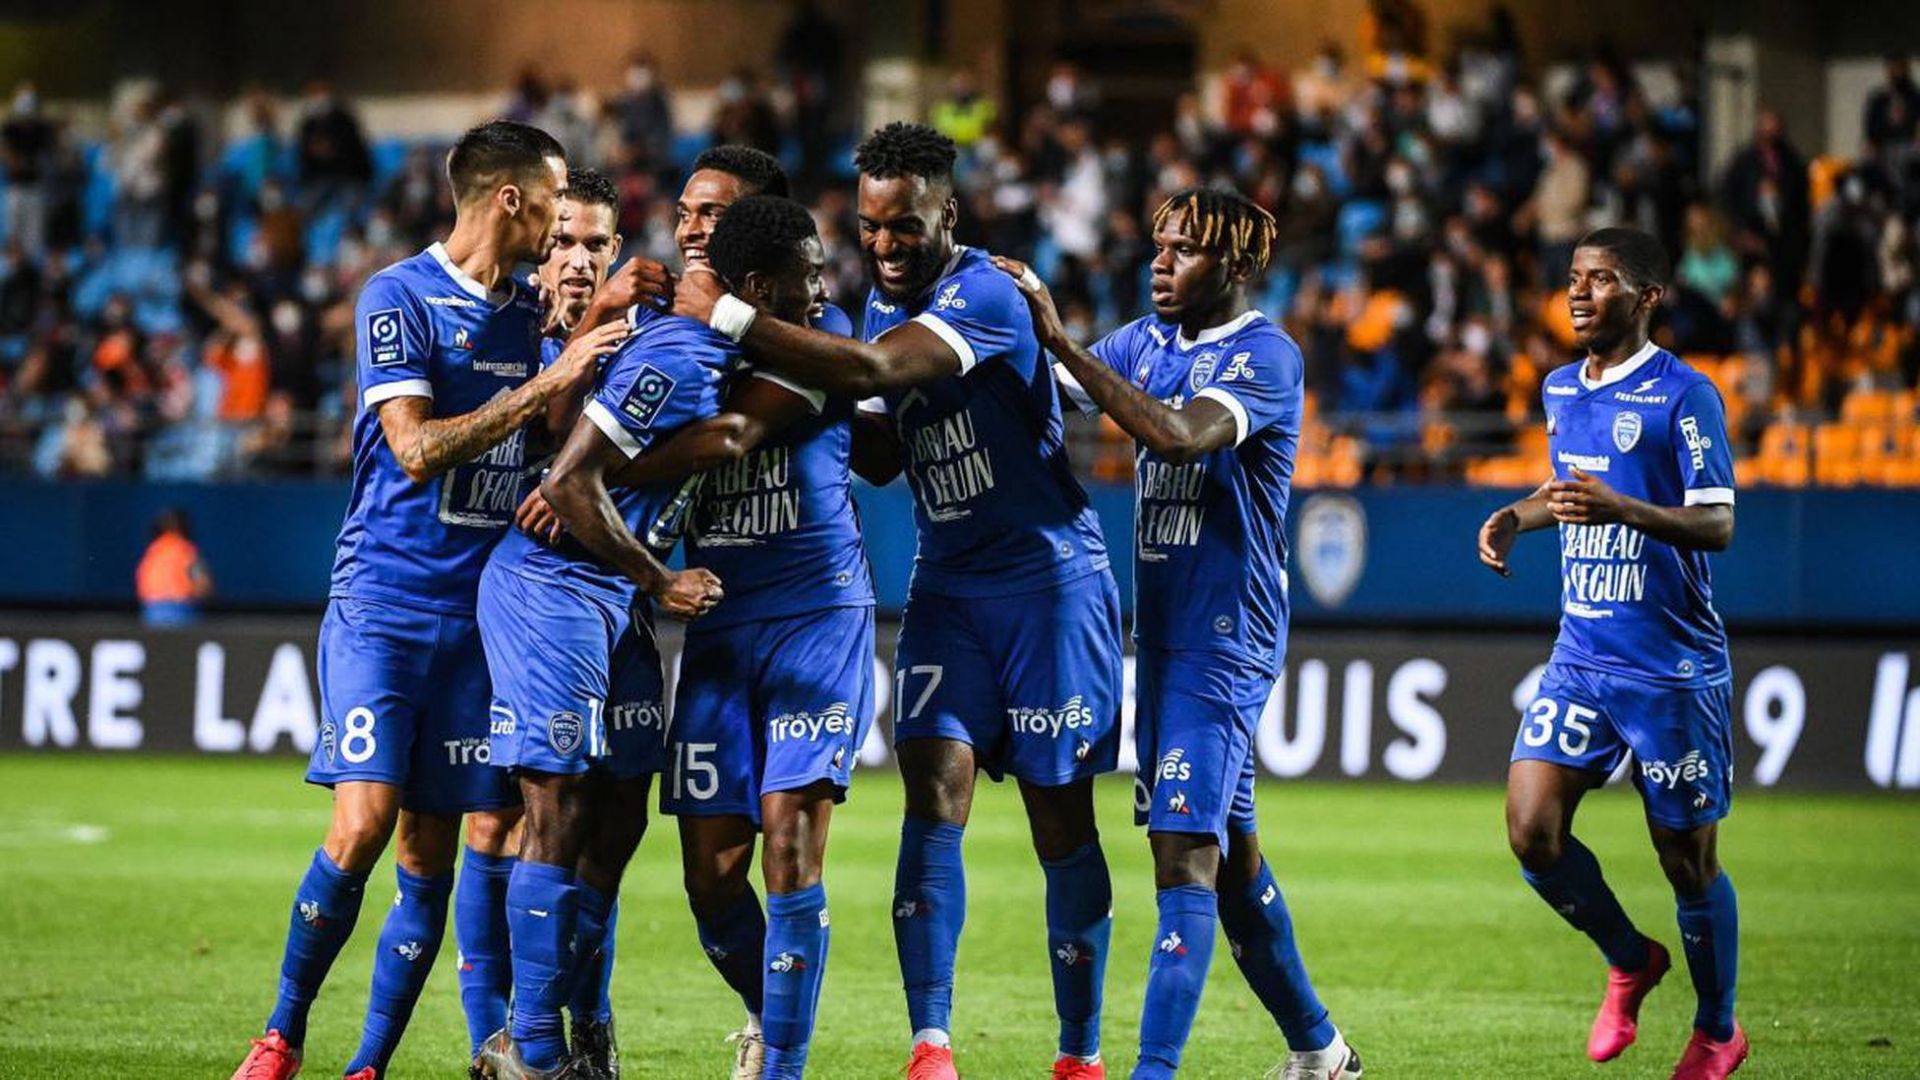 Troyes will take on Toulouse in Ligue 1 on Sunday.